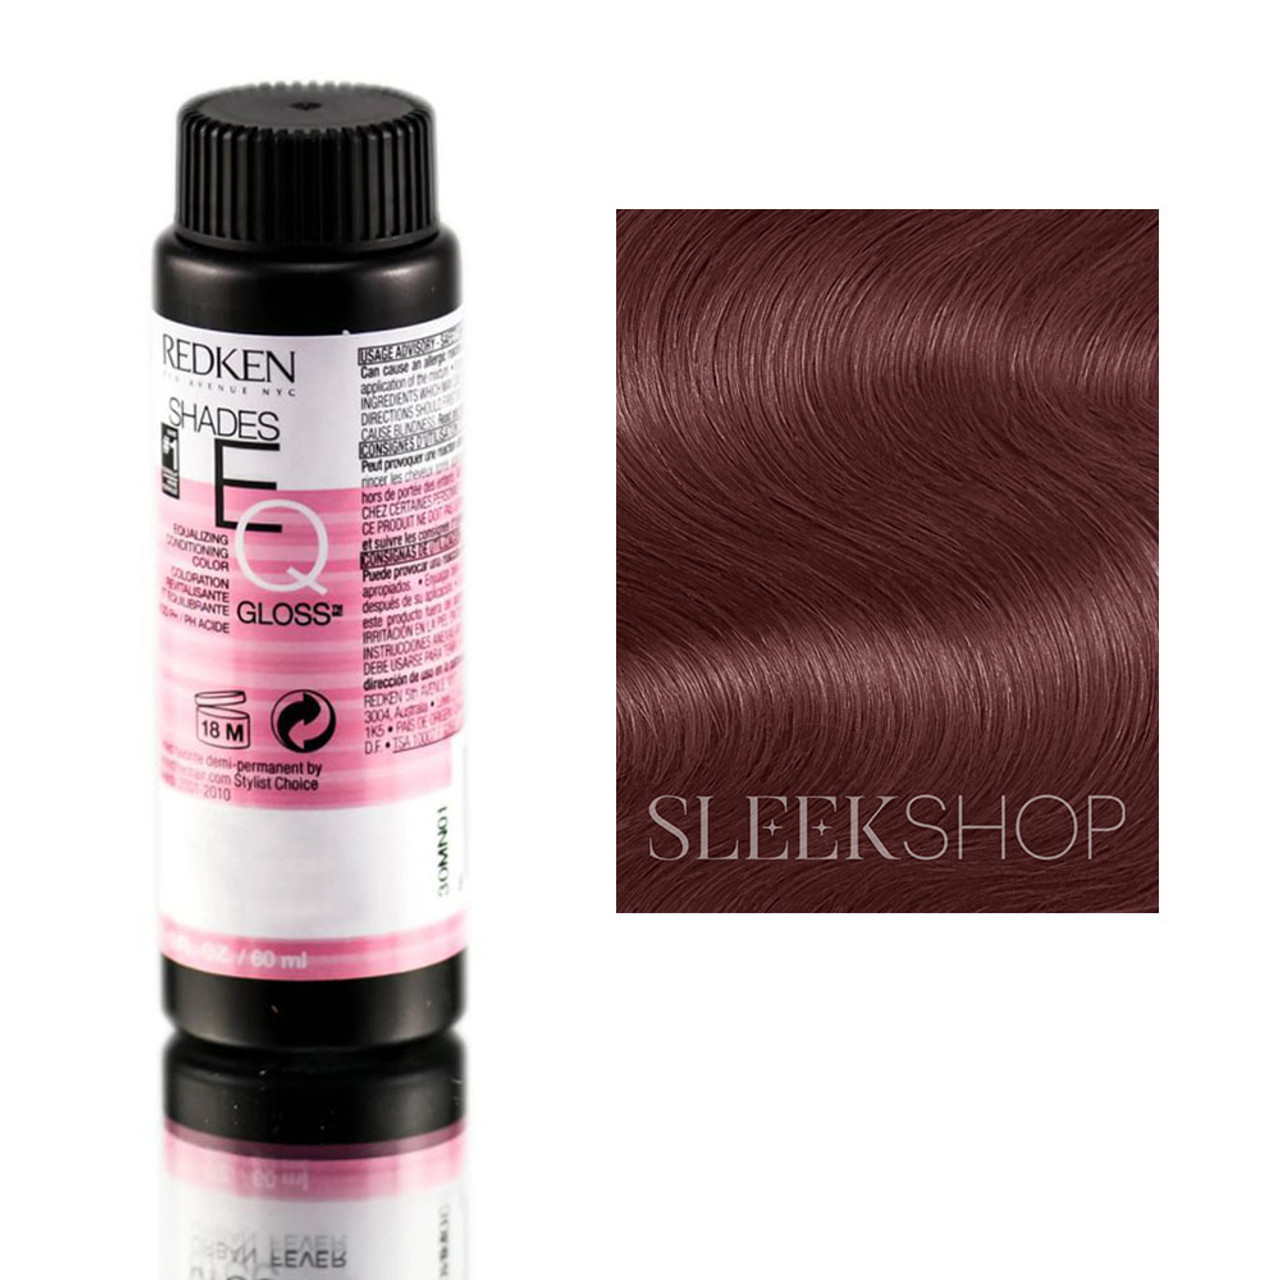 03R (3R) - Roxy Red Redken Shades EQ Demi-Permanent Equalizing Conditioning  Color Gloss, Ammonia-Free